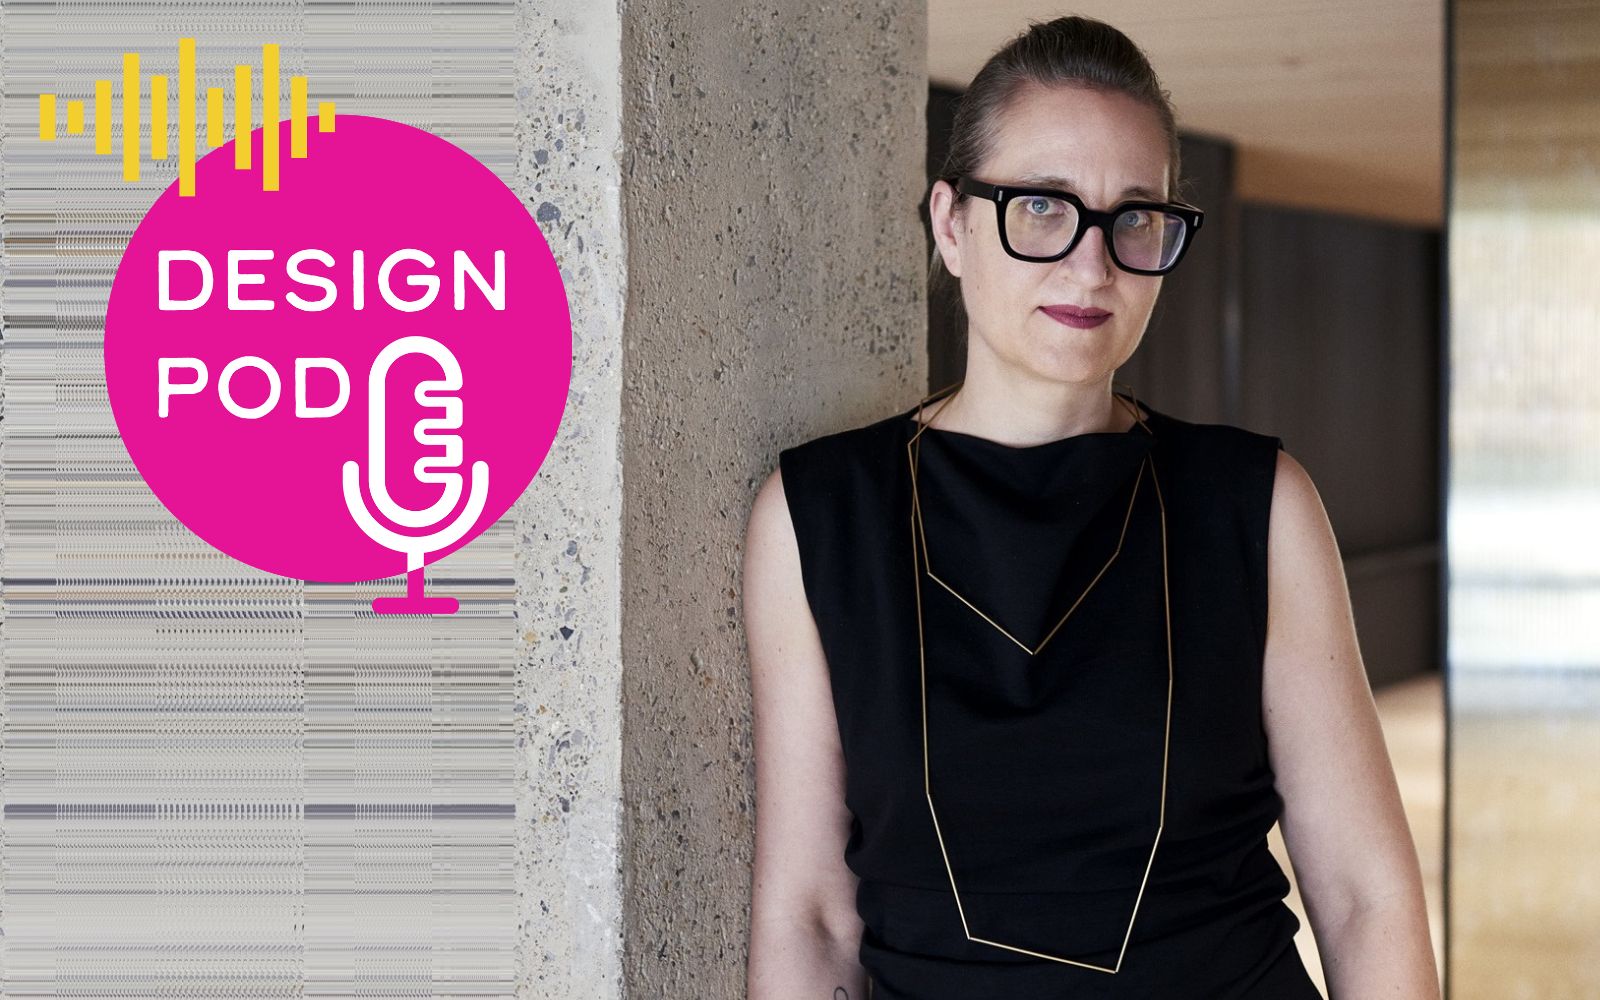 Tina Norden speaks to Sophie Harper about Experiential Design on the latest DESIGN POD podcast